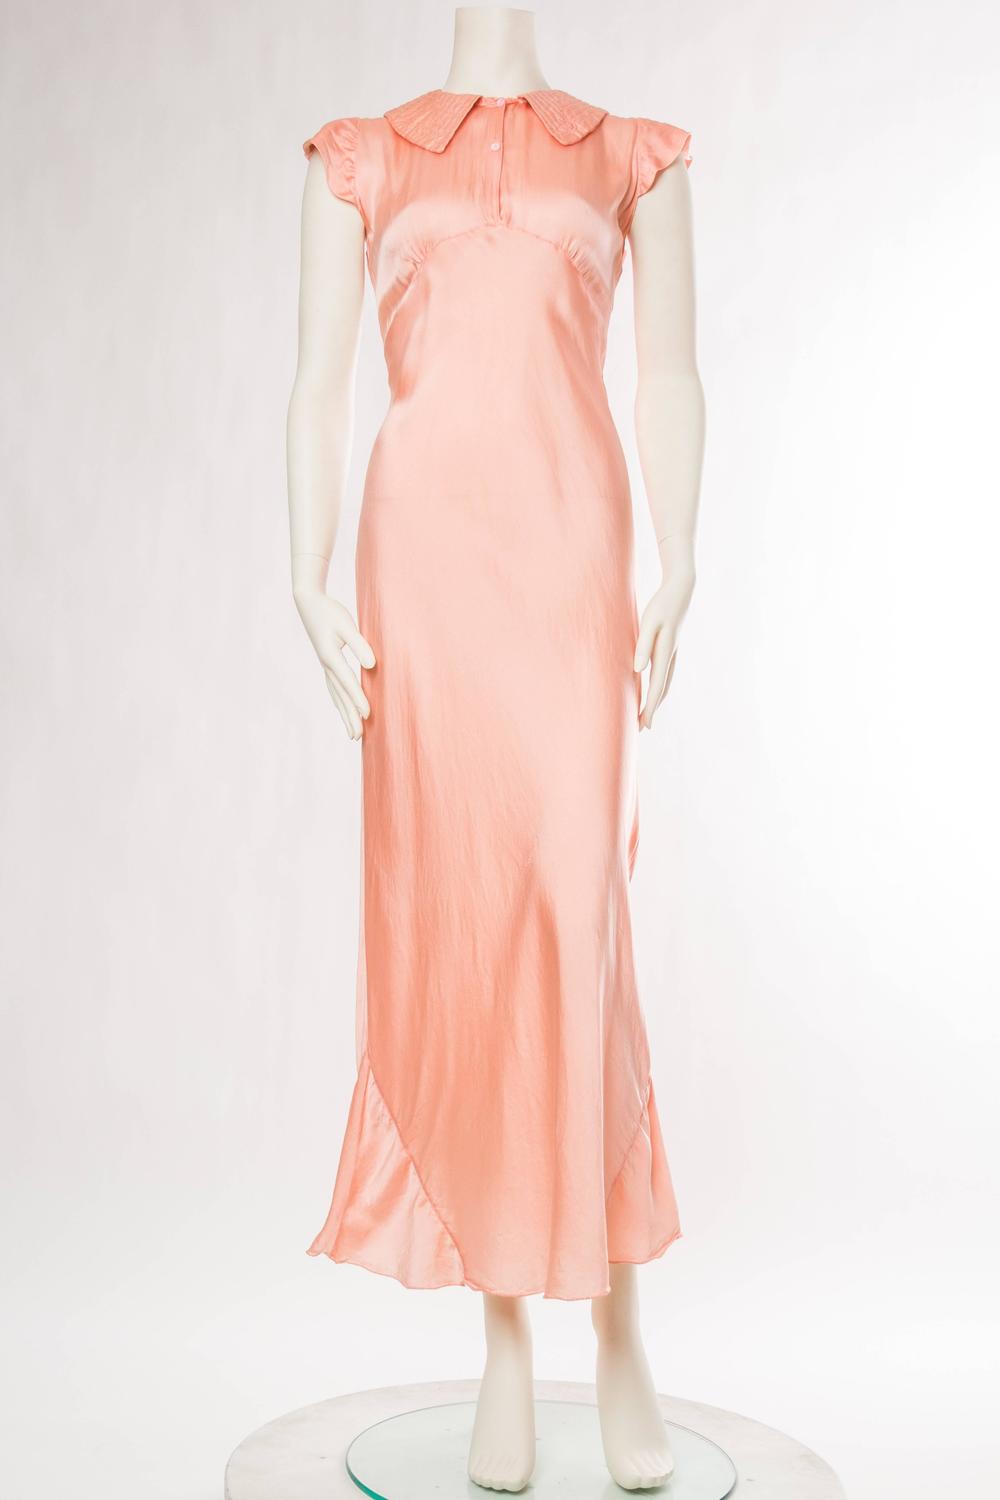 1930s Bias Cut Silk Satin Negligee For Sale at 1stdibs